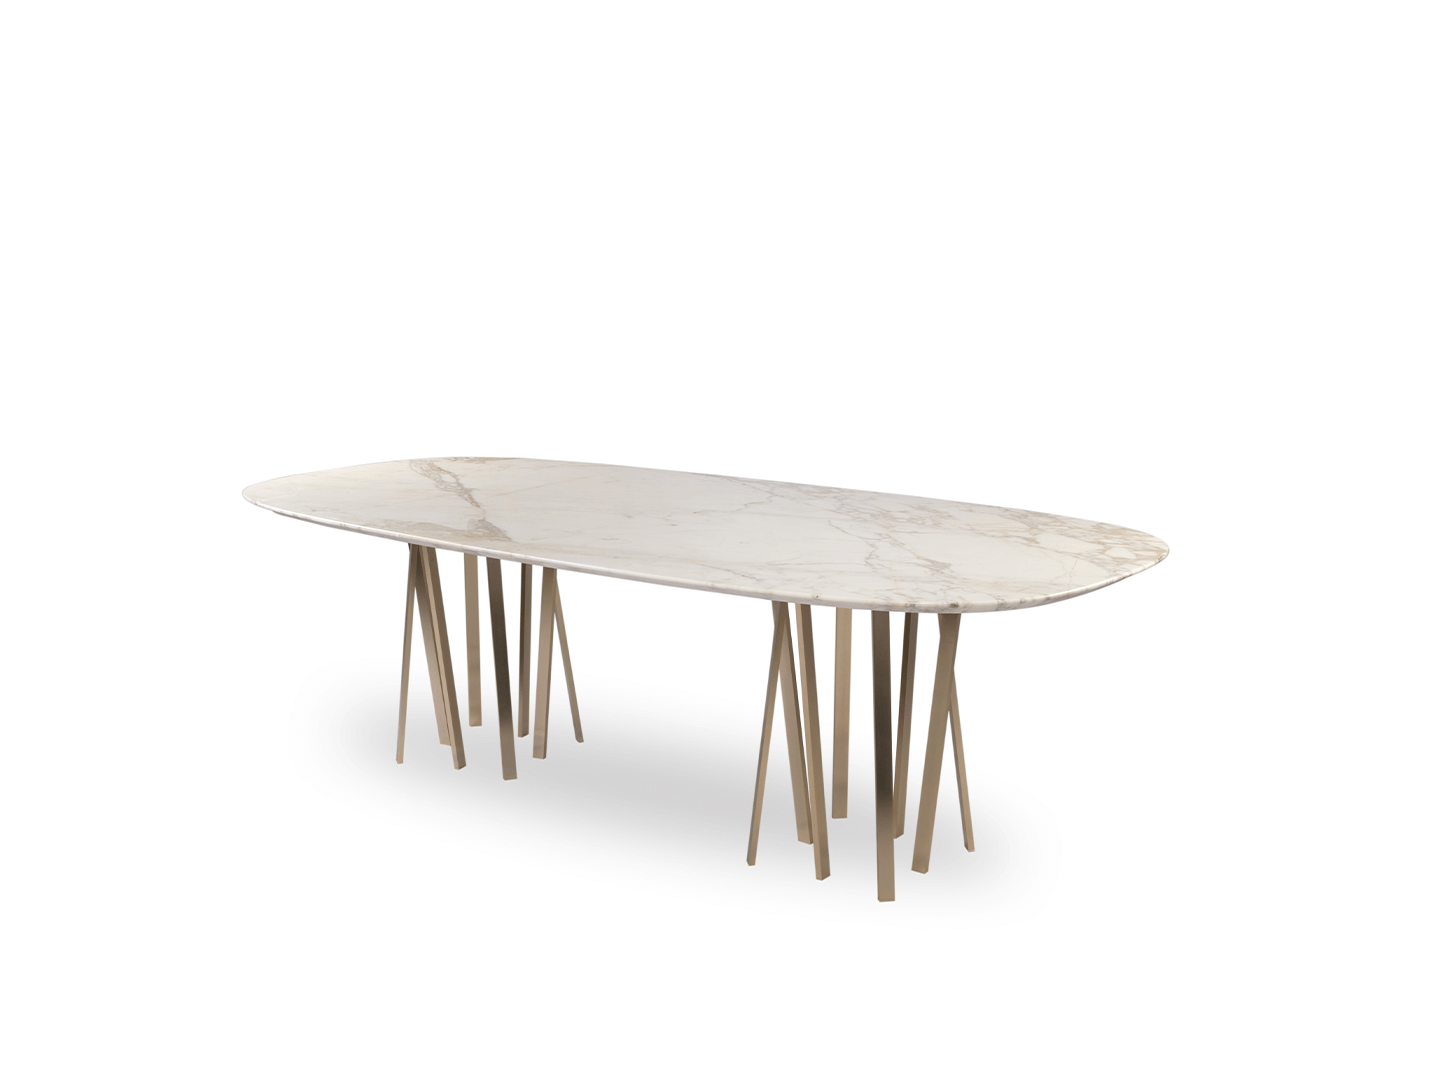 For Hall Oval Table